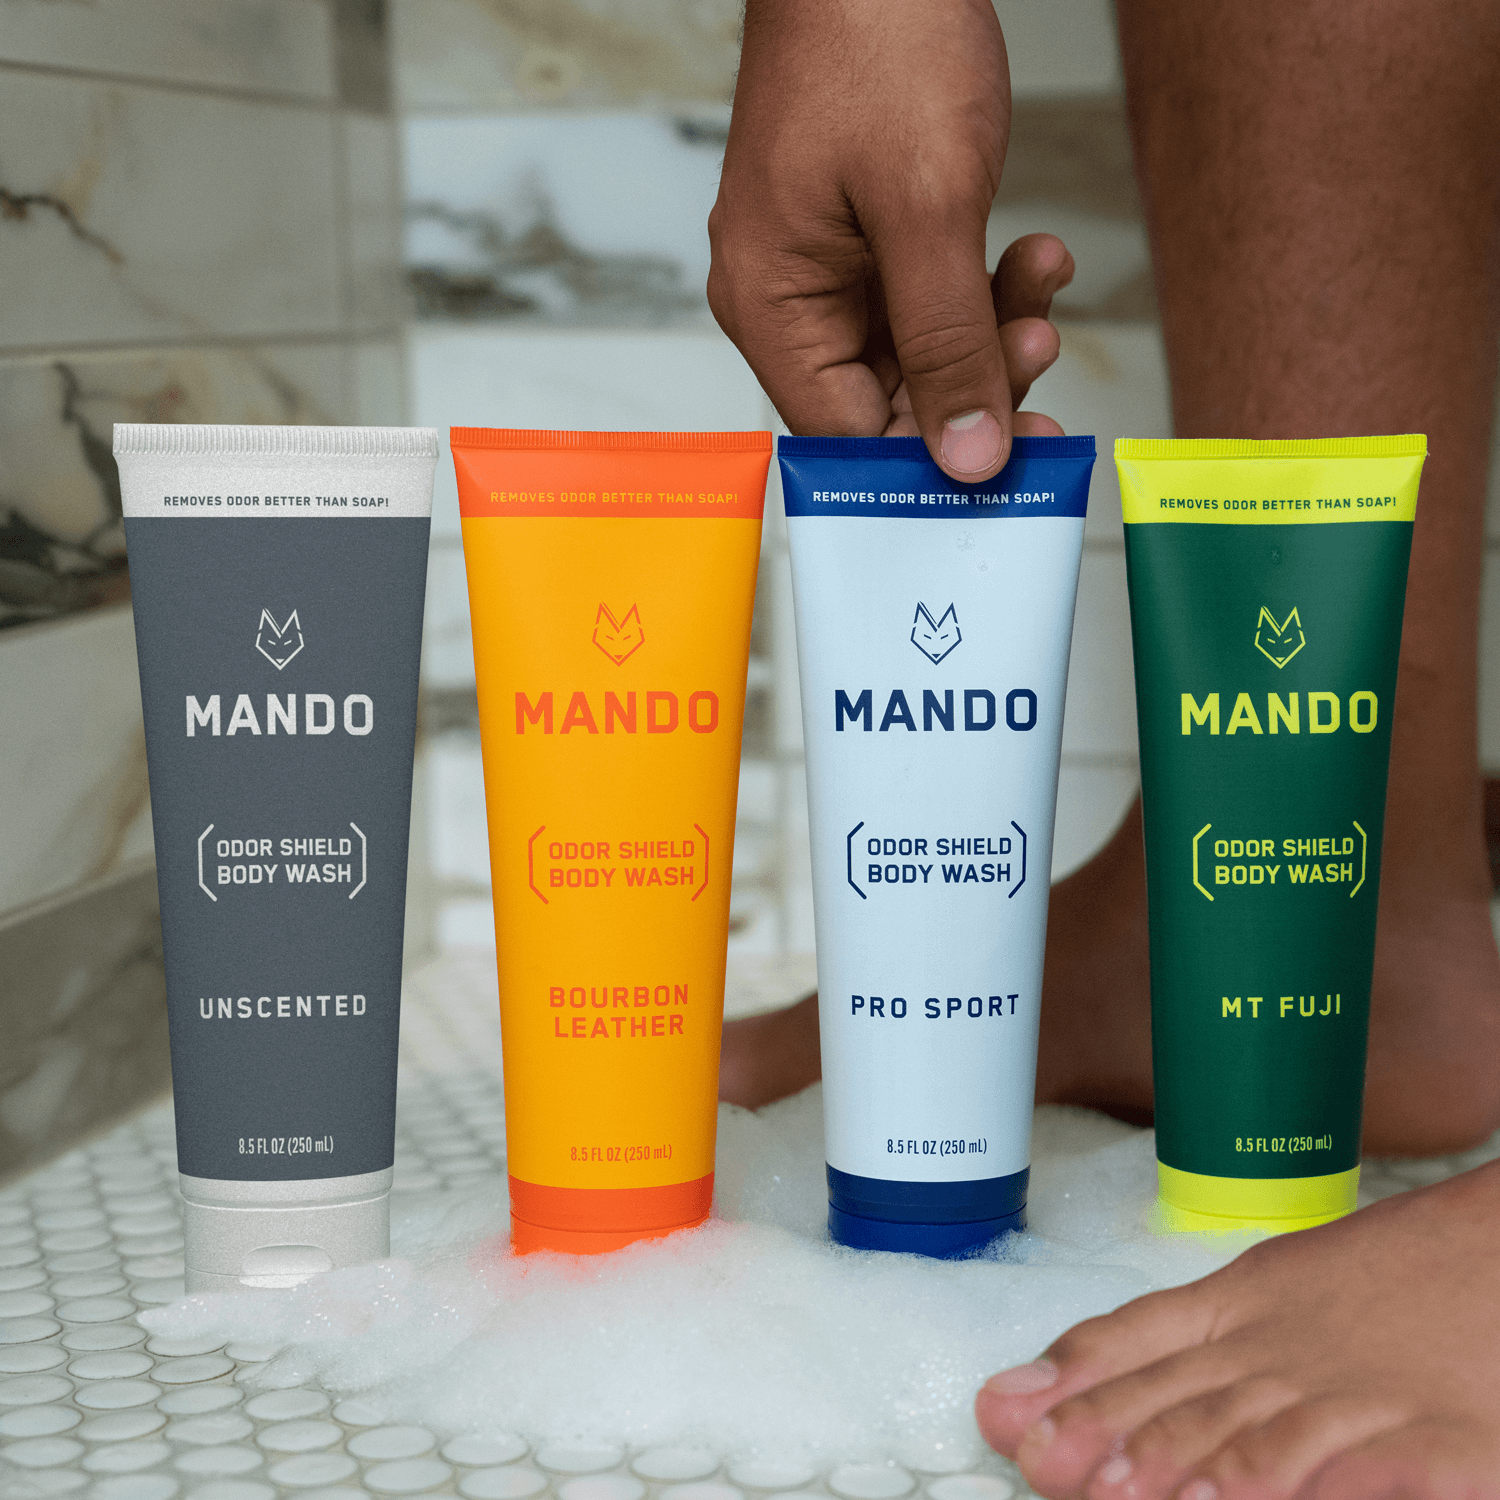 line up of Mando body wash in unscented, bourbon leather, pro sport and mt fuji placed on shower floor with person in background